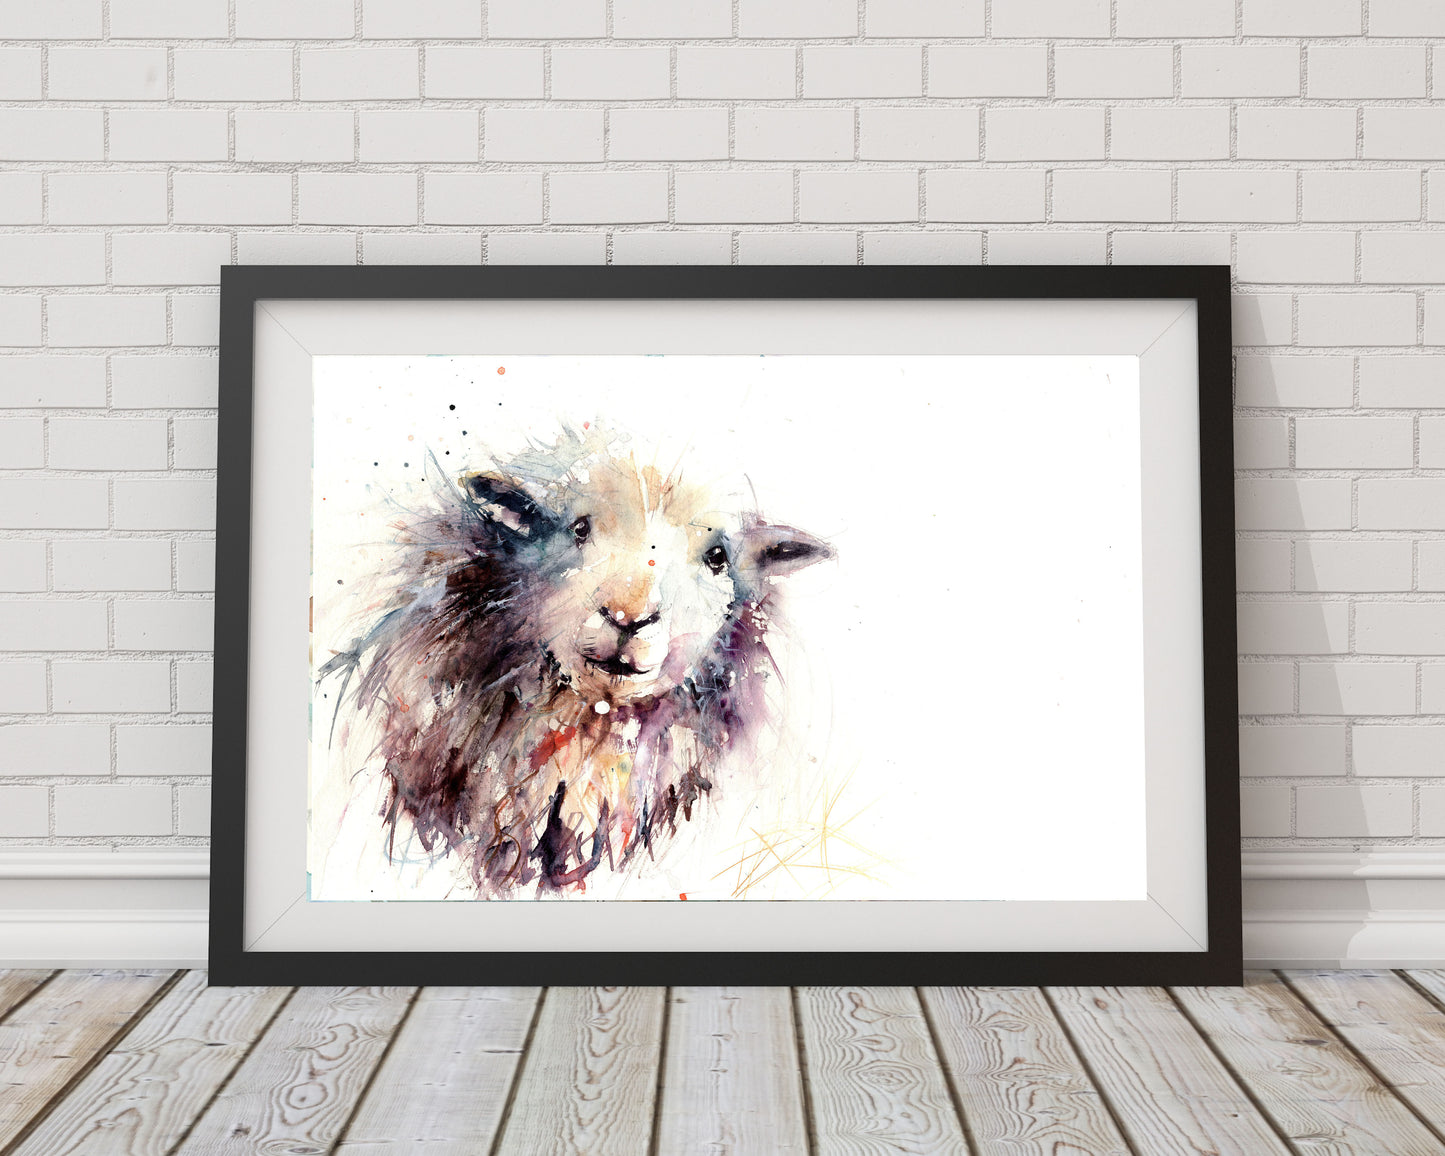 signed LIMITED EDITION PRINT of  original Herdwick sheep  painting    - Jen Buckley Art limited edition animal art prints